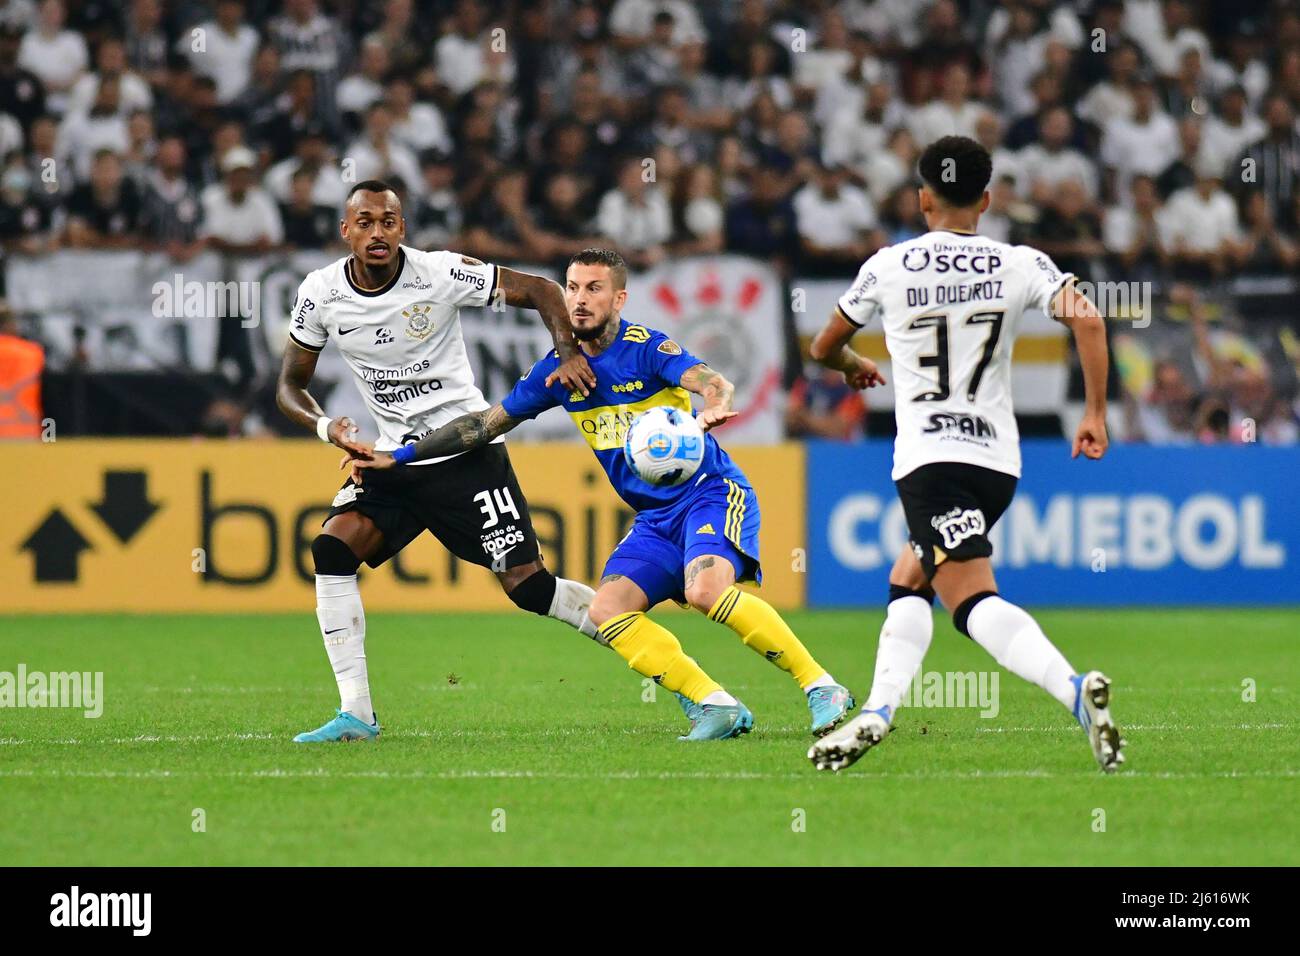 SÃO PAULO, BRASIL - APRIL 26: Raul of S.C. Corinthians battles for possession with Darío Benedetto of Boca Juniors during Copa CONMEBOL Libertadores match between S.C. Corinthians and Boca Juniors at Arena Corinthians on April 26, 2022 in São Paulo, Brazil. (Photo by Leandro Bernardes/PxImages) Credit: Px Images/Alamy Live News Stock Photo